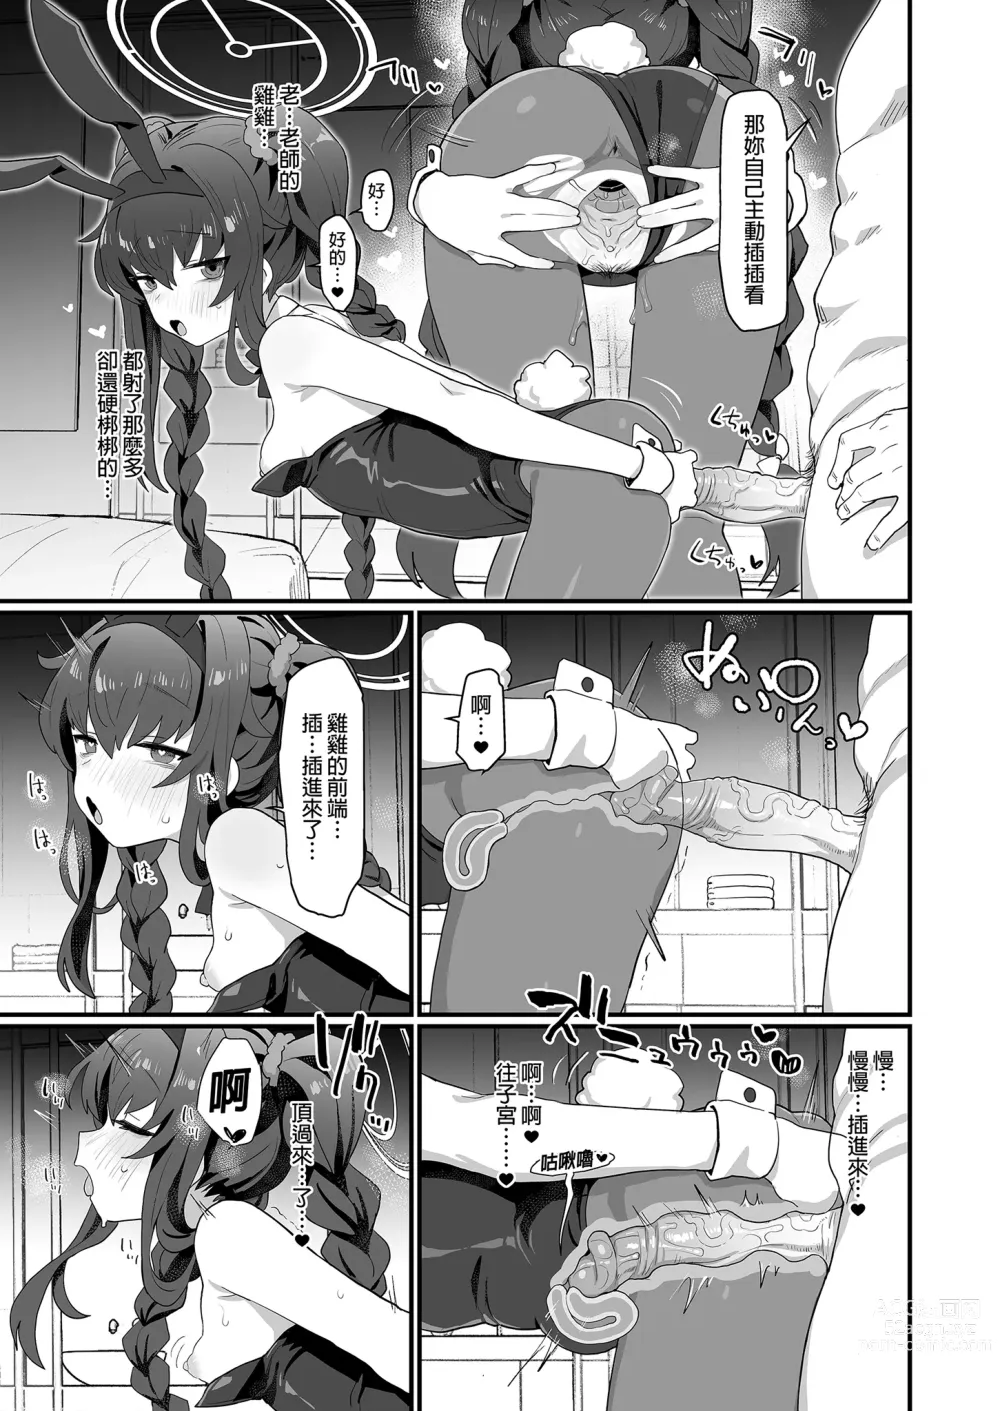 Page 27 of doujinshi 古書館願望清單 (decensored)